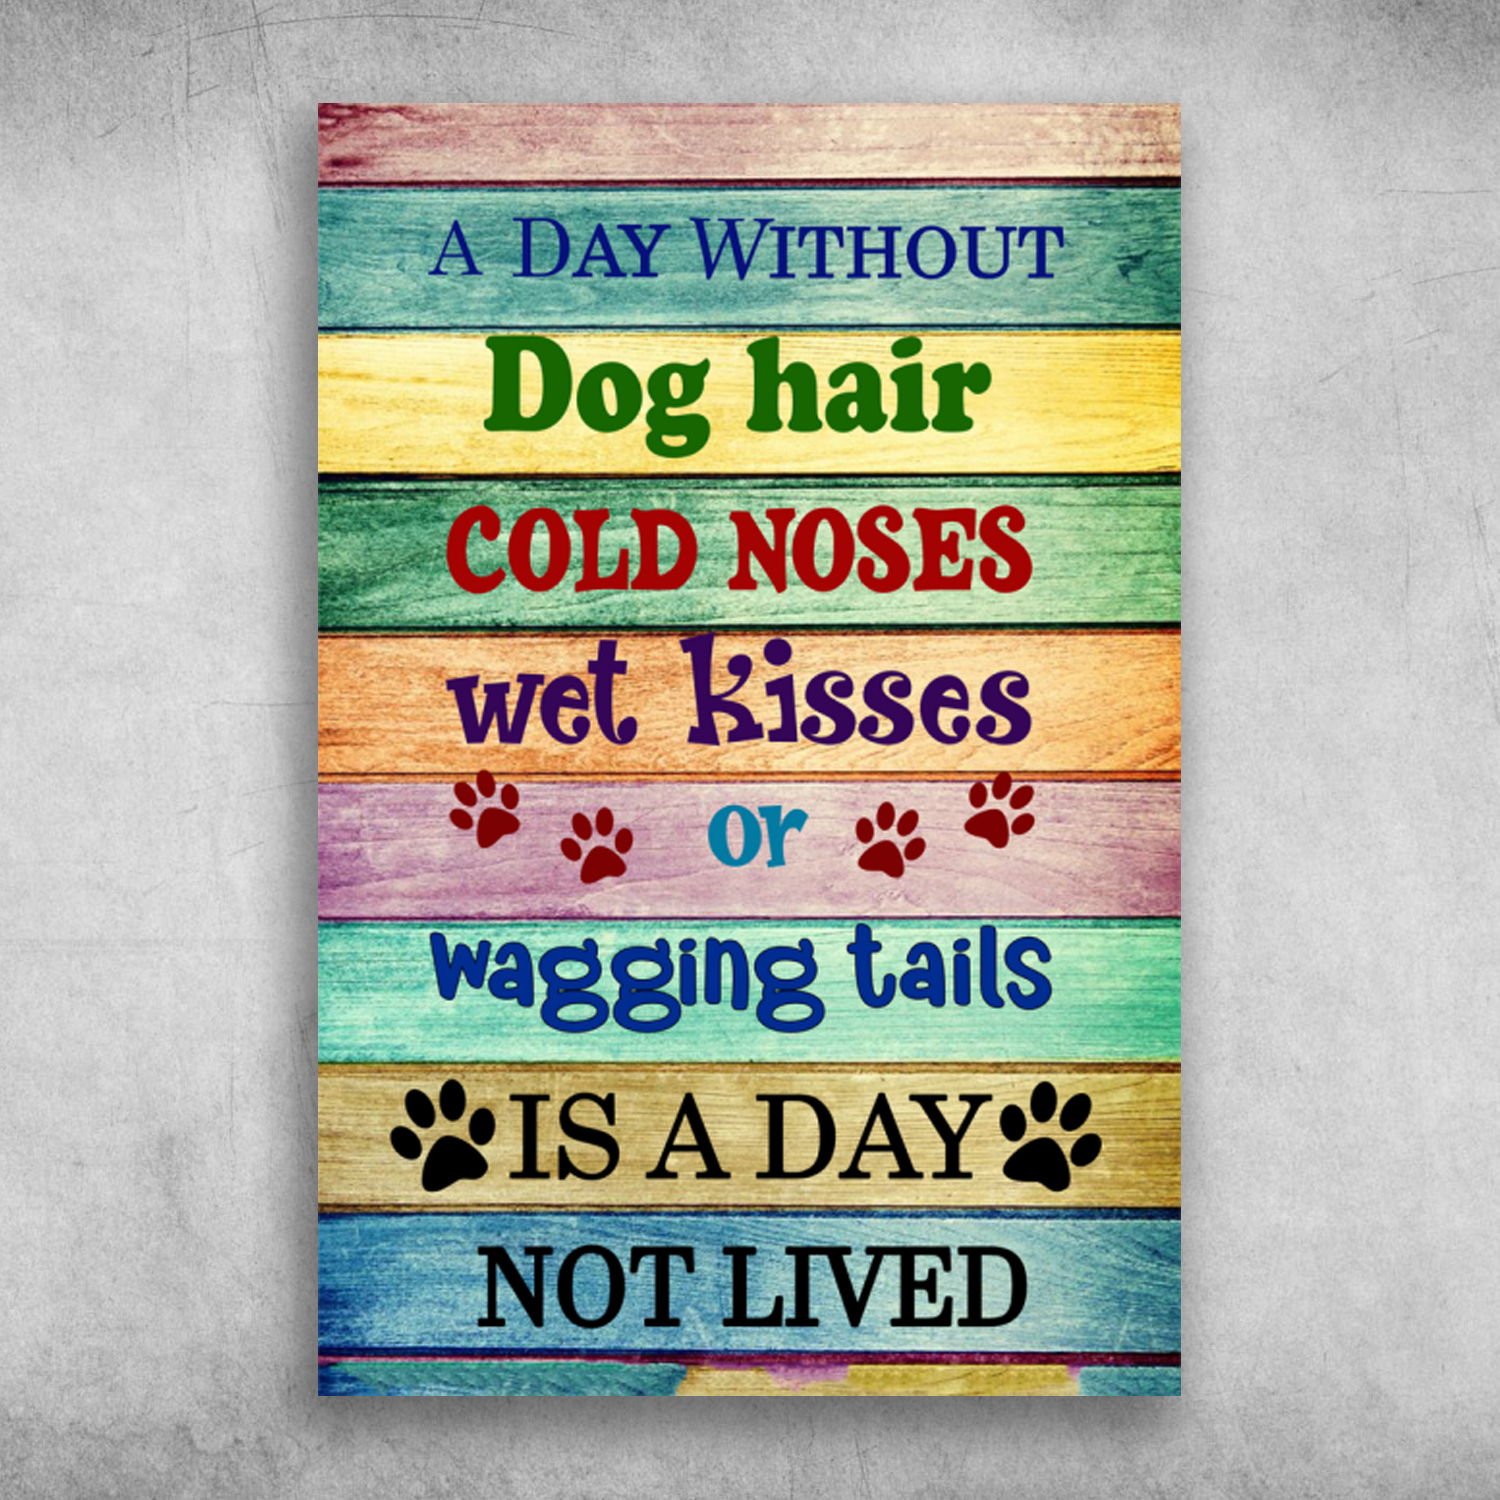 A Day Without Dog Hair Cold Noses Wet Kisses Or Wagging Tails